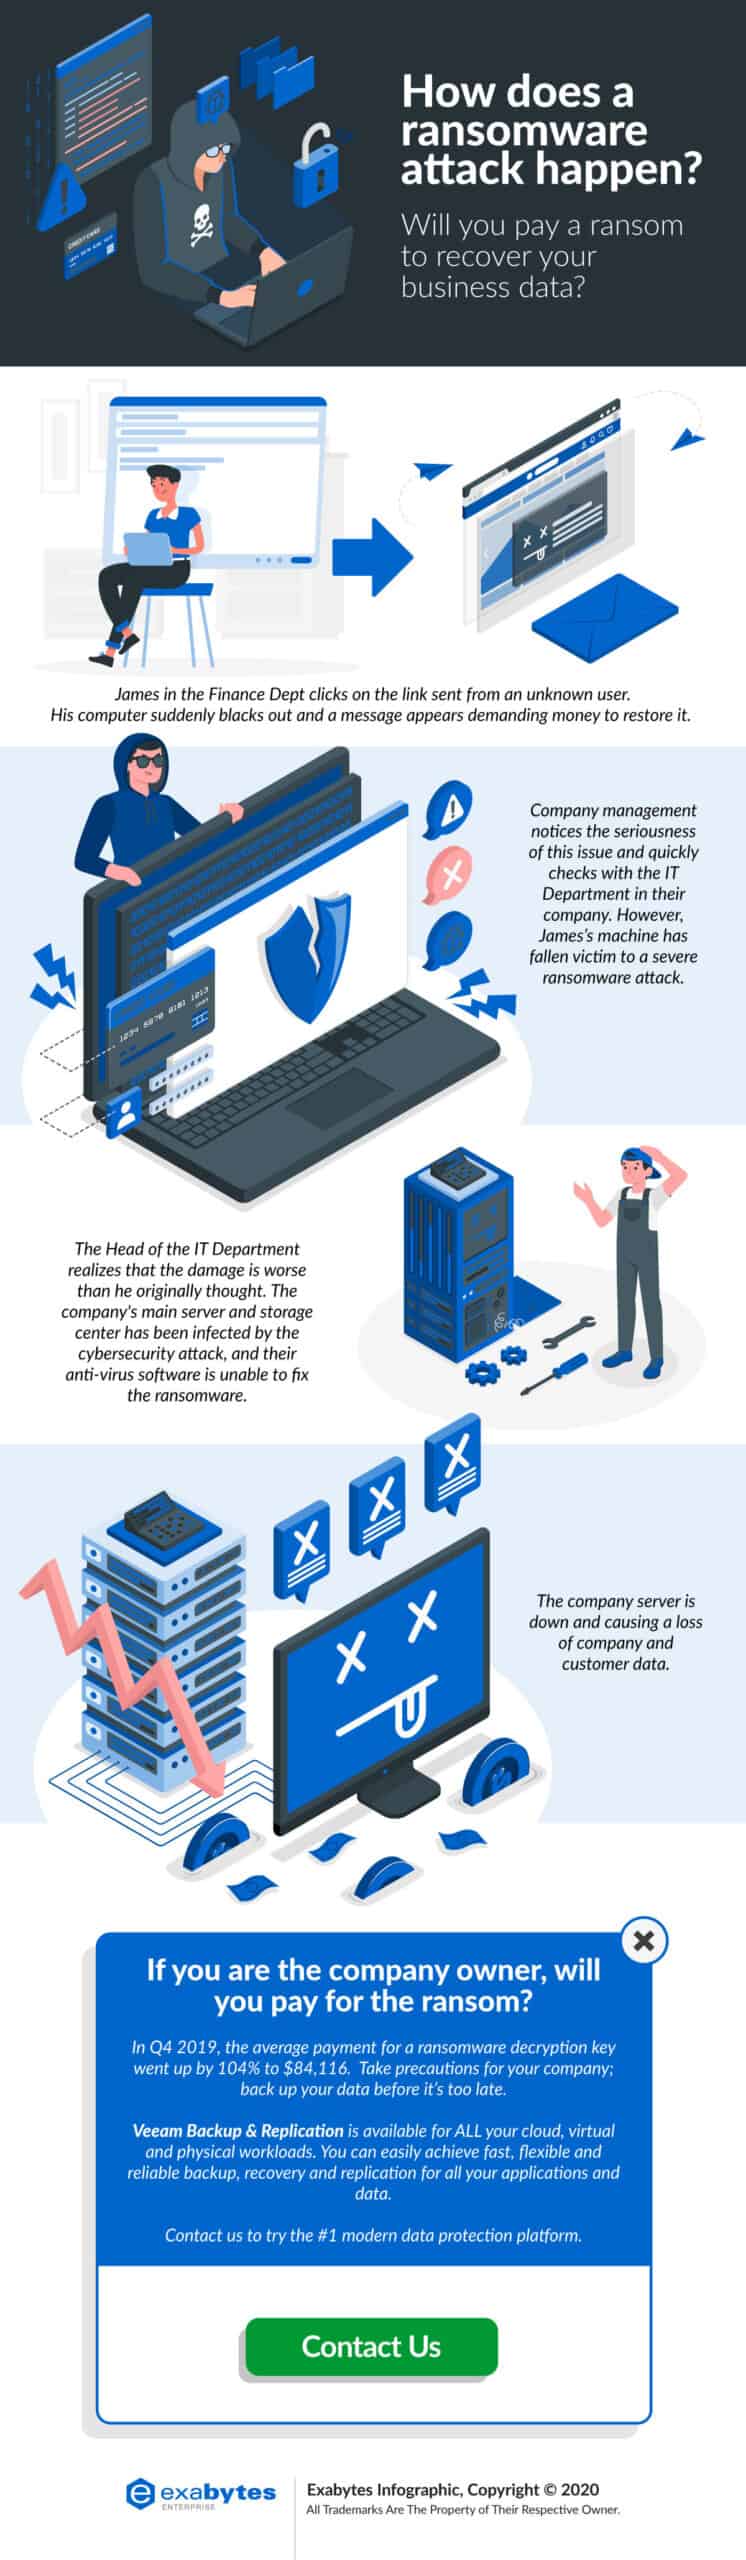 How does a ransomware attach happen - infographic